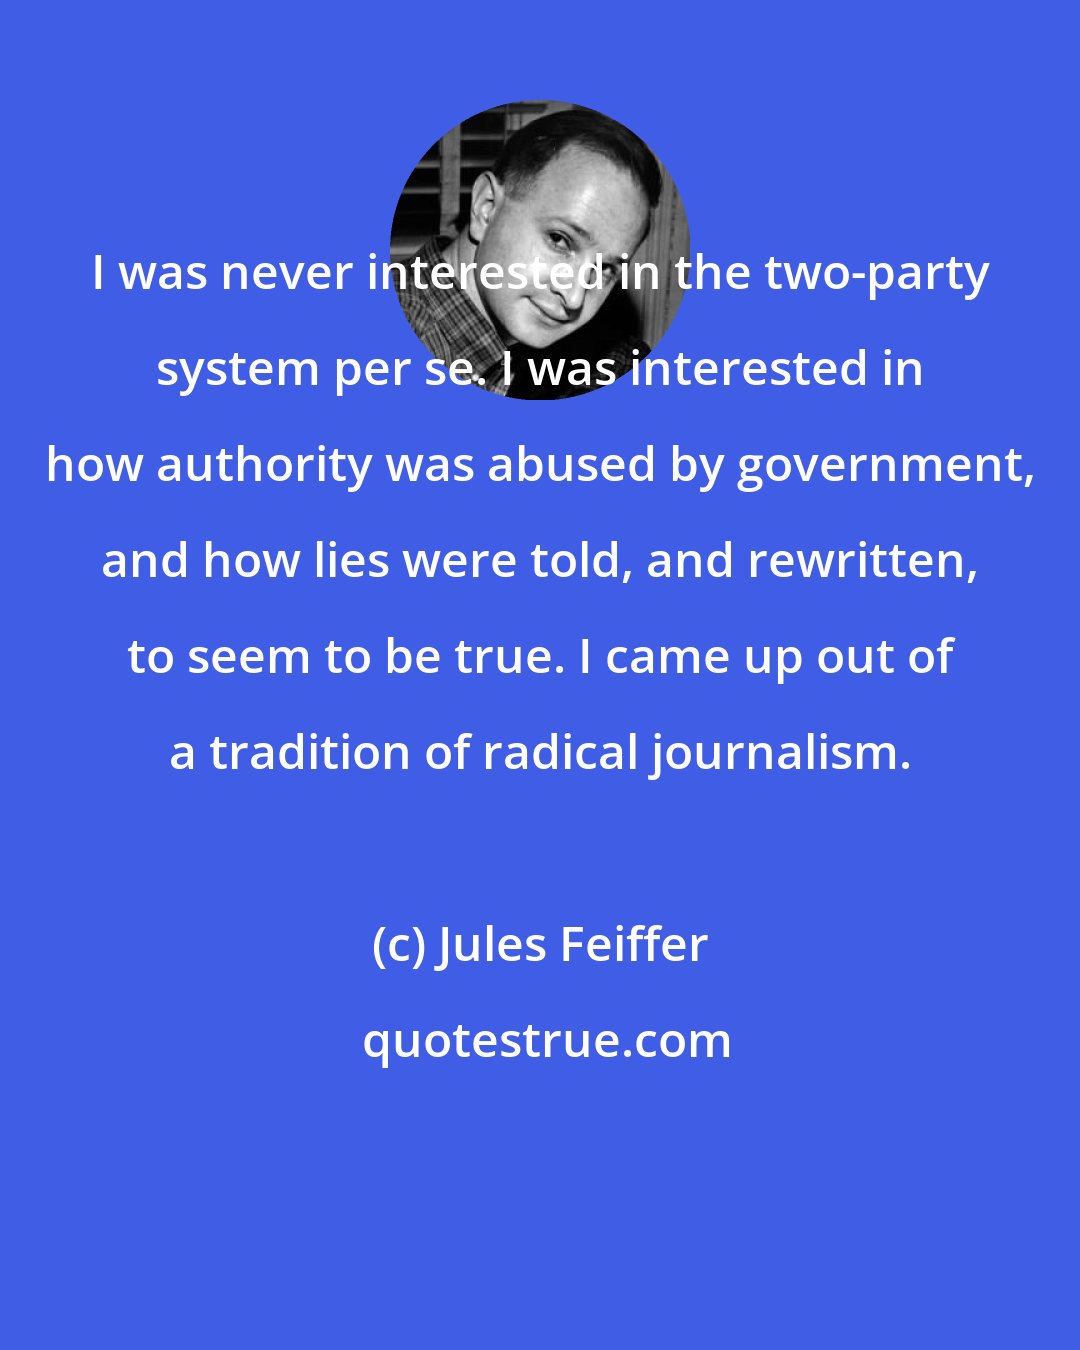 Jules Feiffer: I was never interested in the two-party system per se. I was interested in how authority was abused by government, and how lies were told, and rewritten, to seem to be true. I came up out of a tradition of radical journalism.